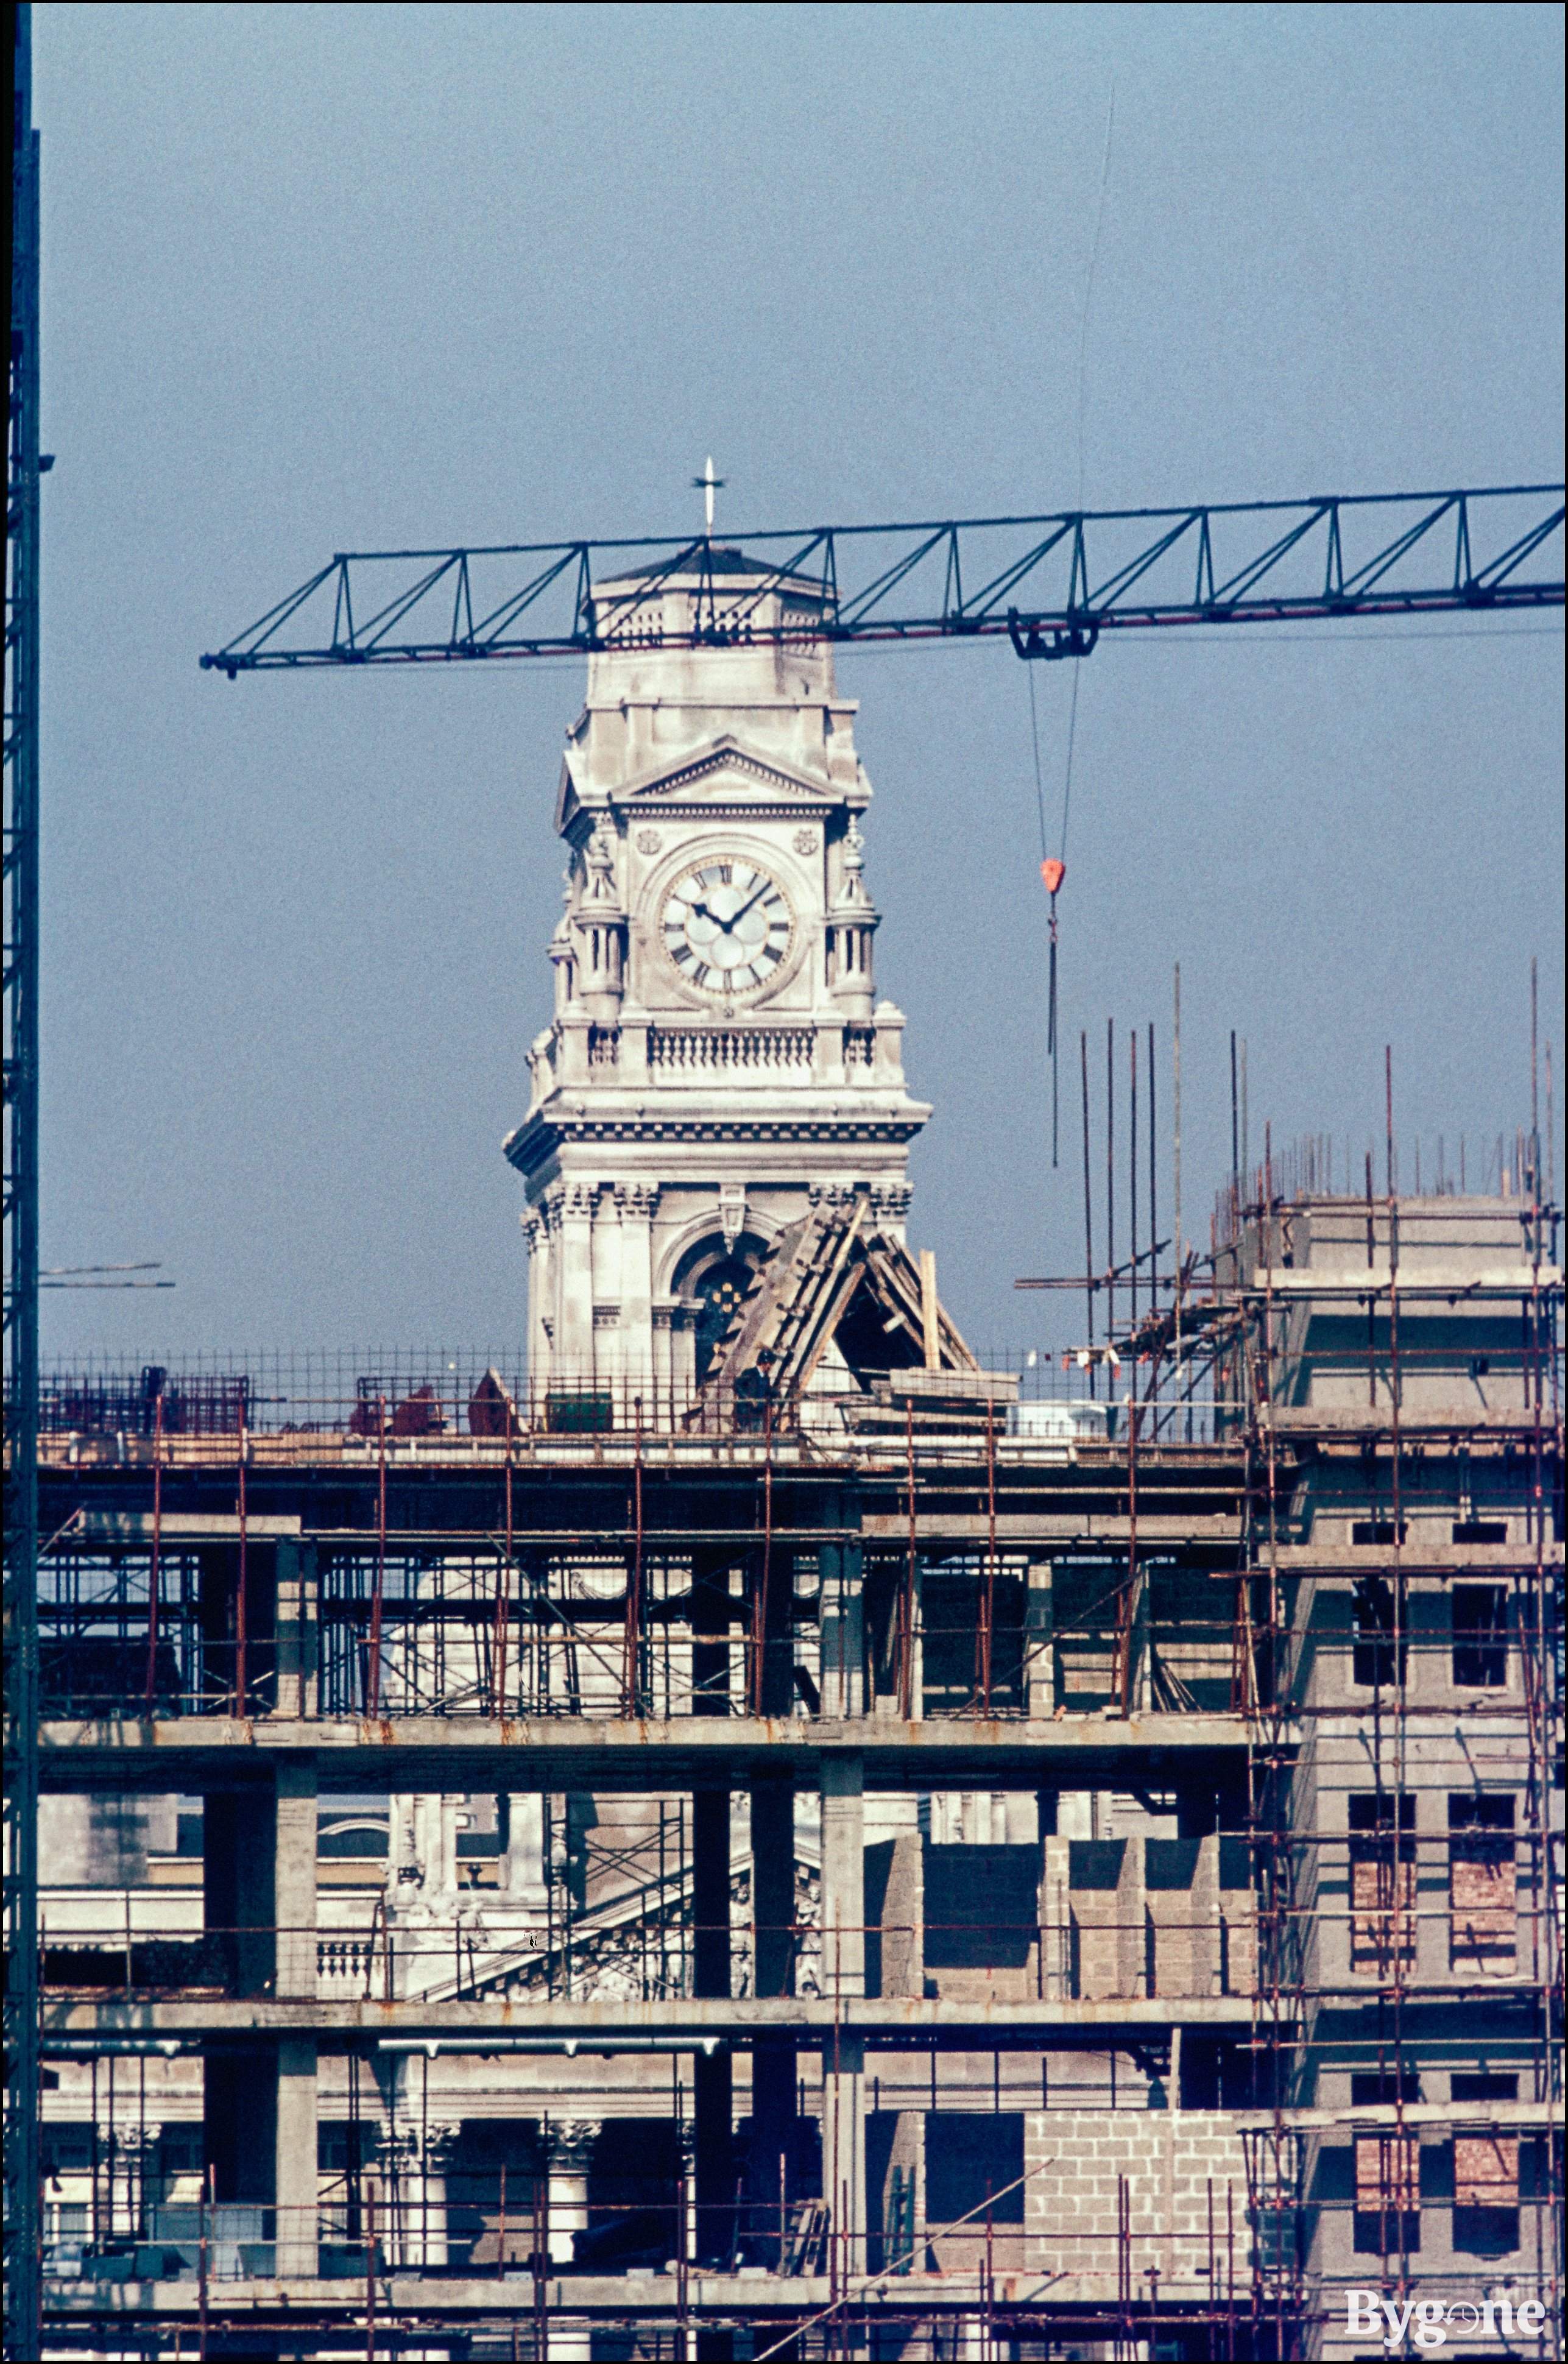 Council offices under construction, Portsmouth Guildhall in background.